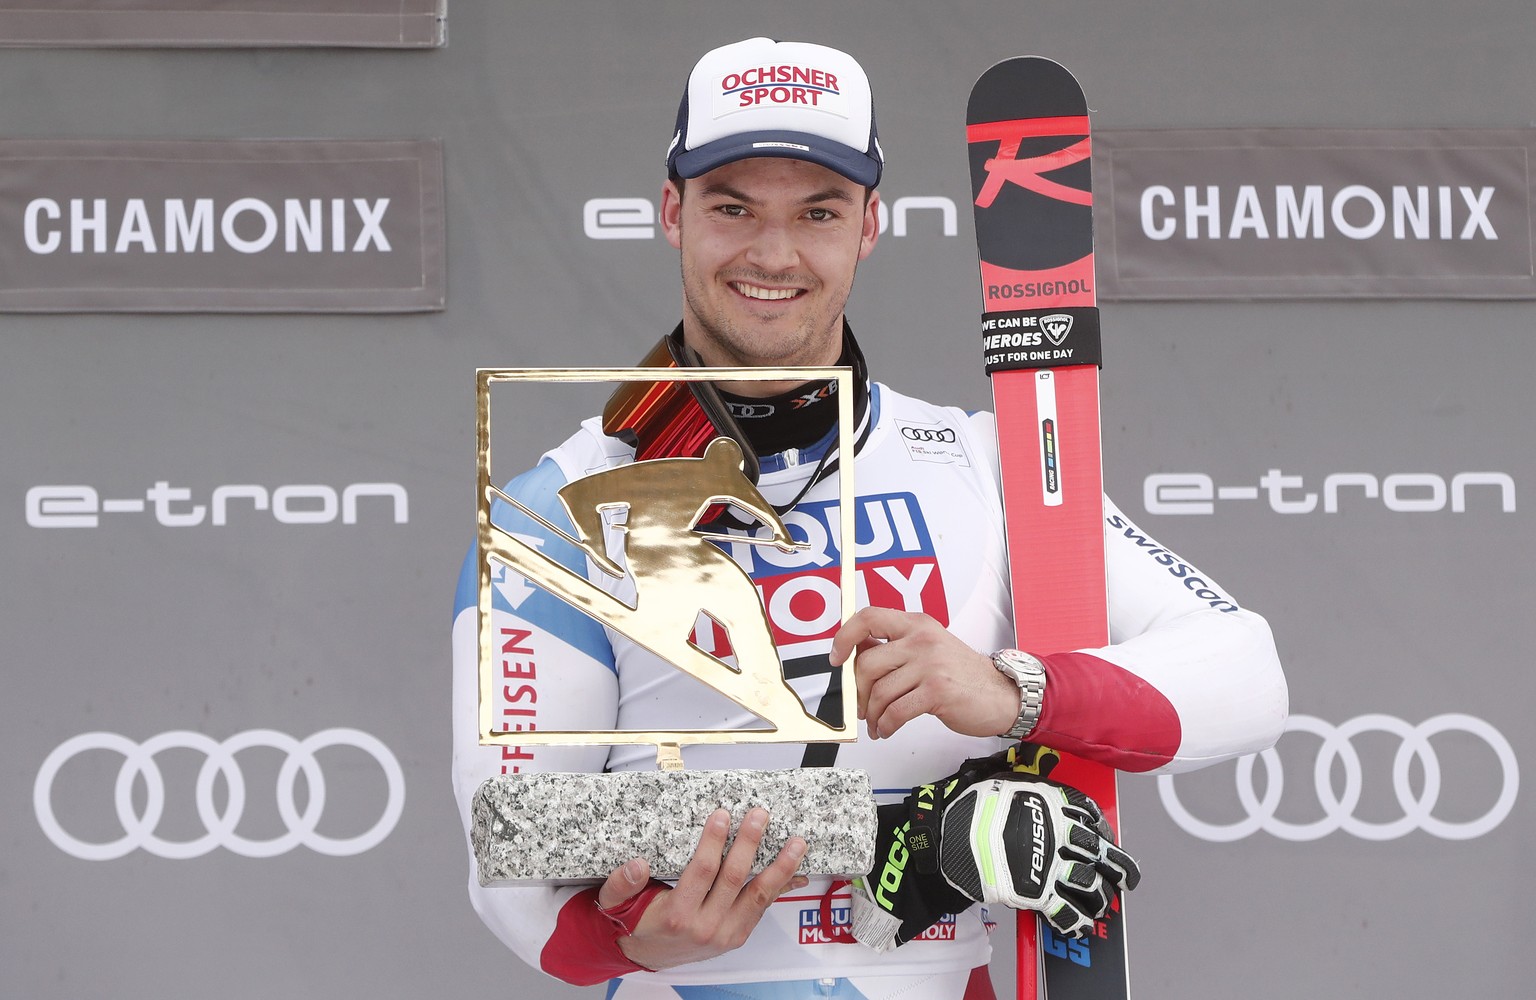 epa08205640 Loic Meillard of Switzerland celebrates on the podium after winning the Men&#039;s Parallel Giant Slalom race at the FIS Alpine Skiing World Cup in Les Houches - Chamonix, France, 09 Febru ...